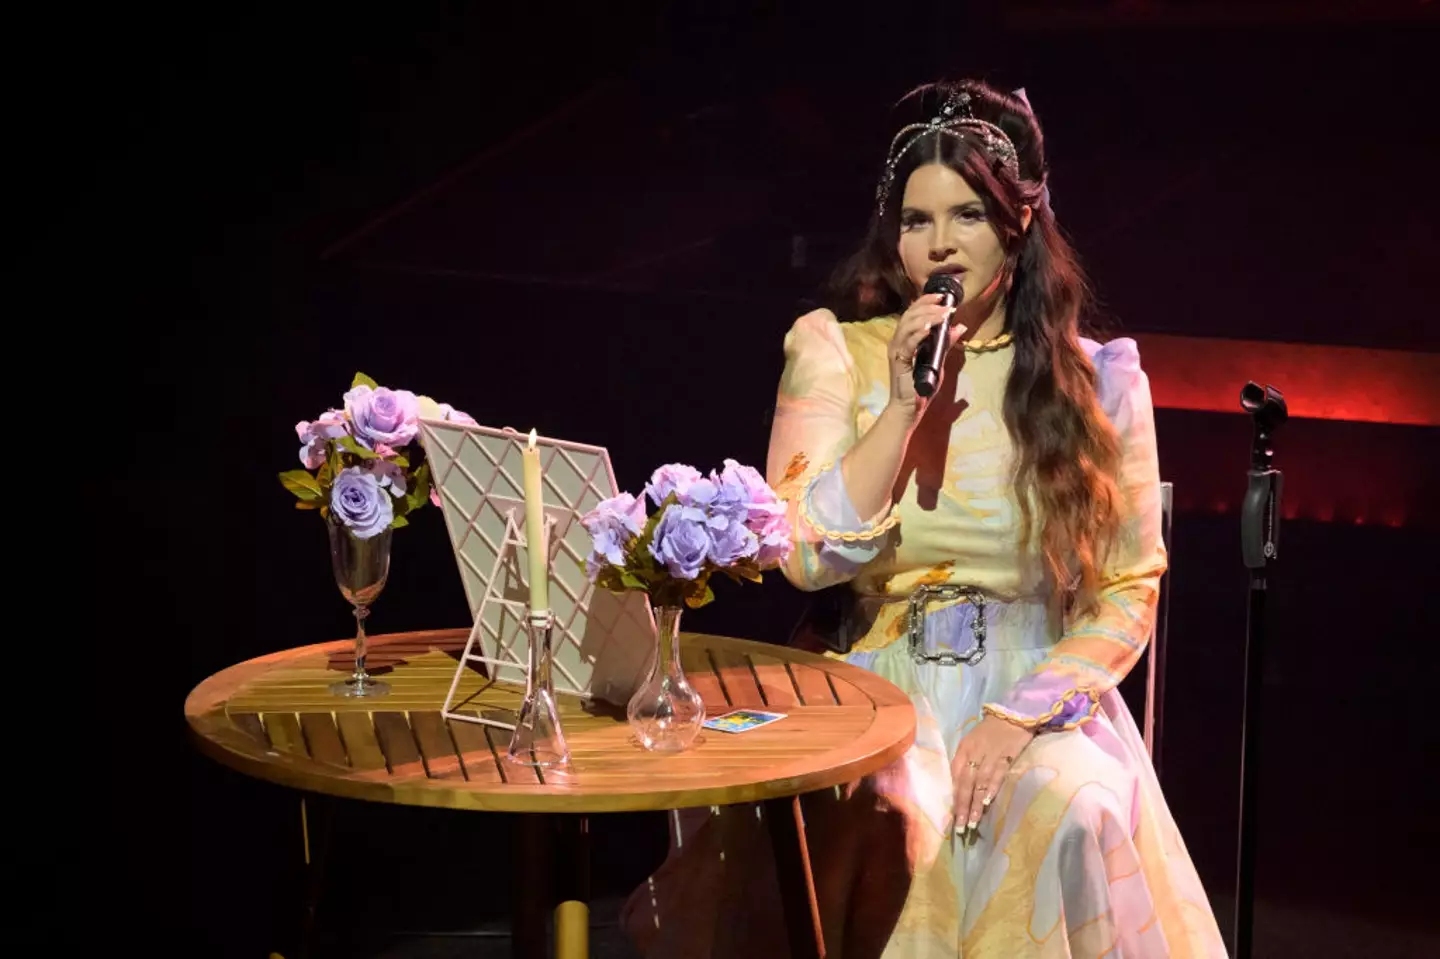 The 'progressive crowd collapse' happened at Lana Del Rey's concert in Mexico City.